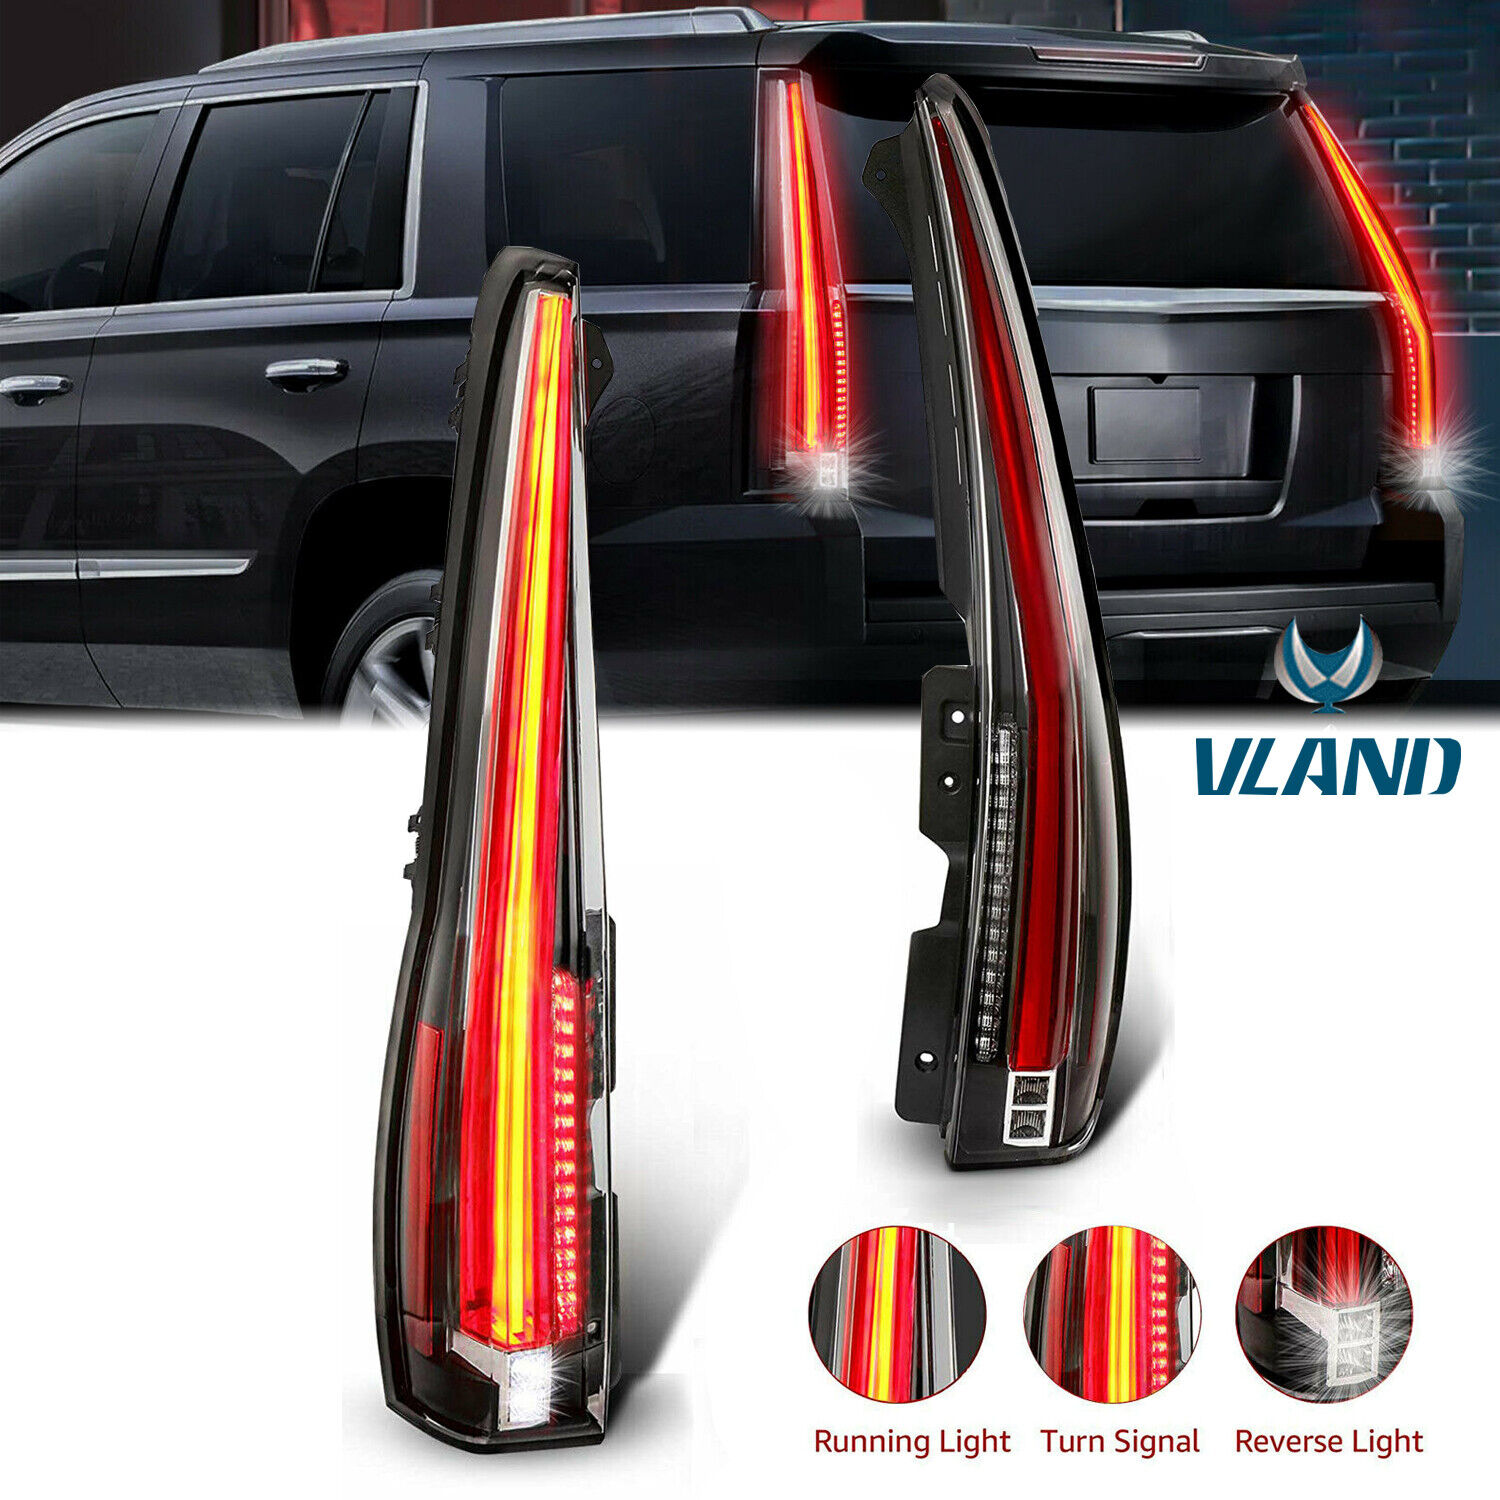 2x LED Tail Lights For 2007-2014 Cadillac Escalade /ESV Red Rear Lamp 2016 Style